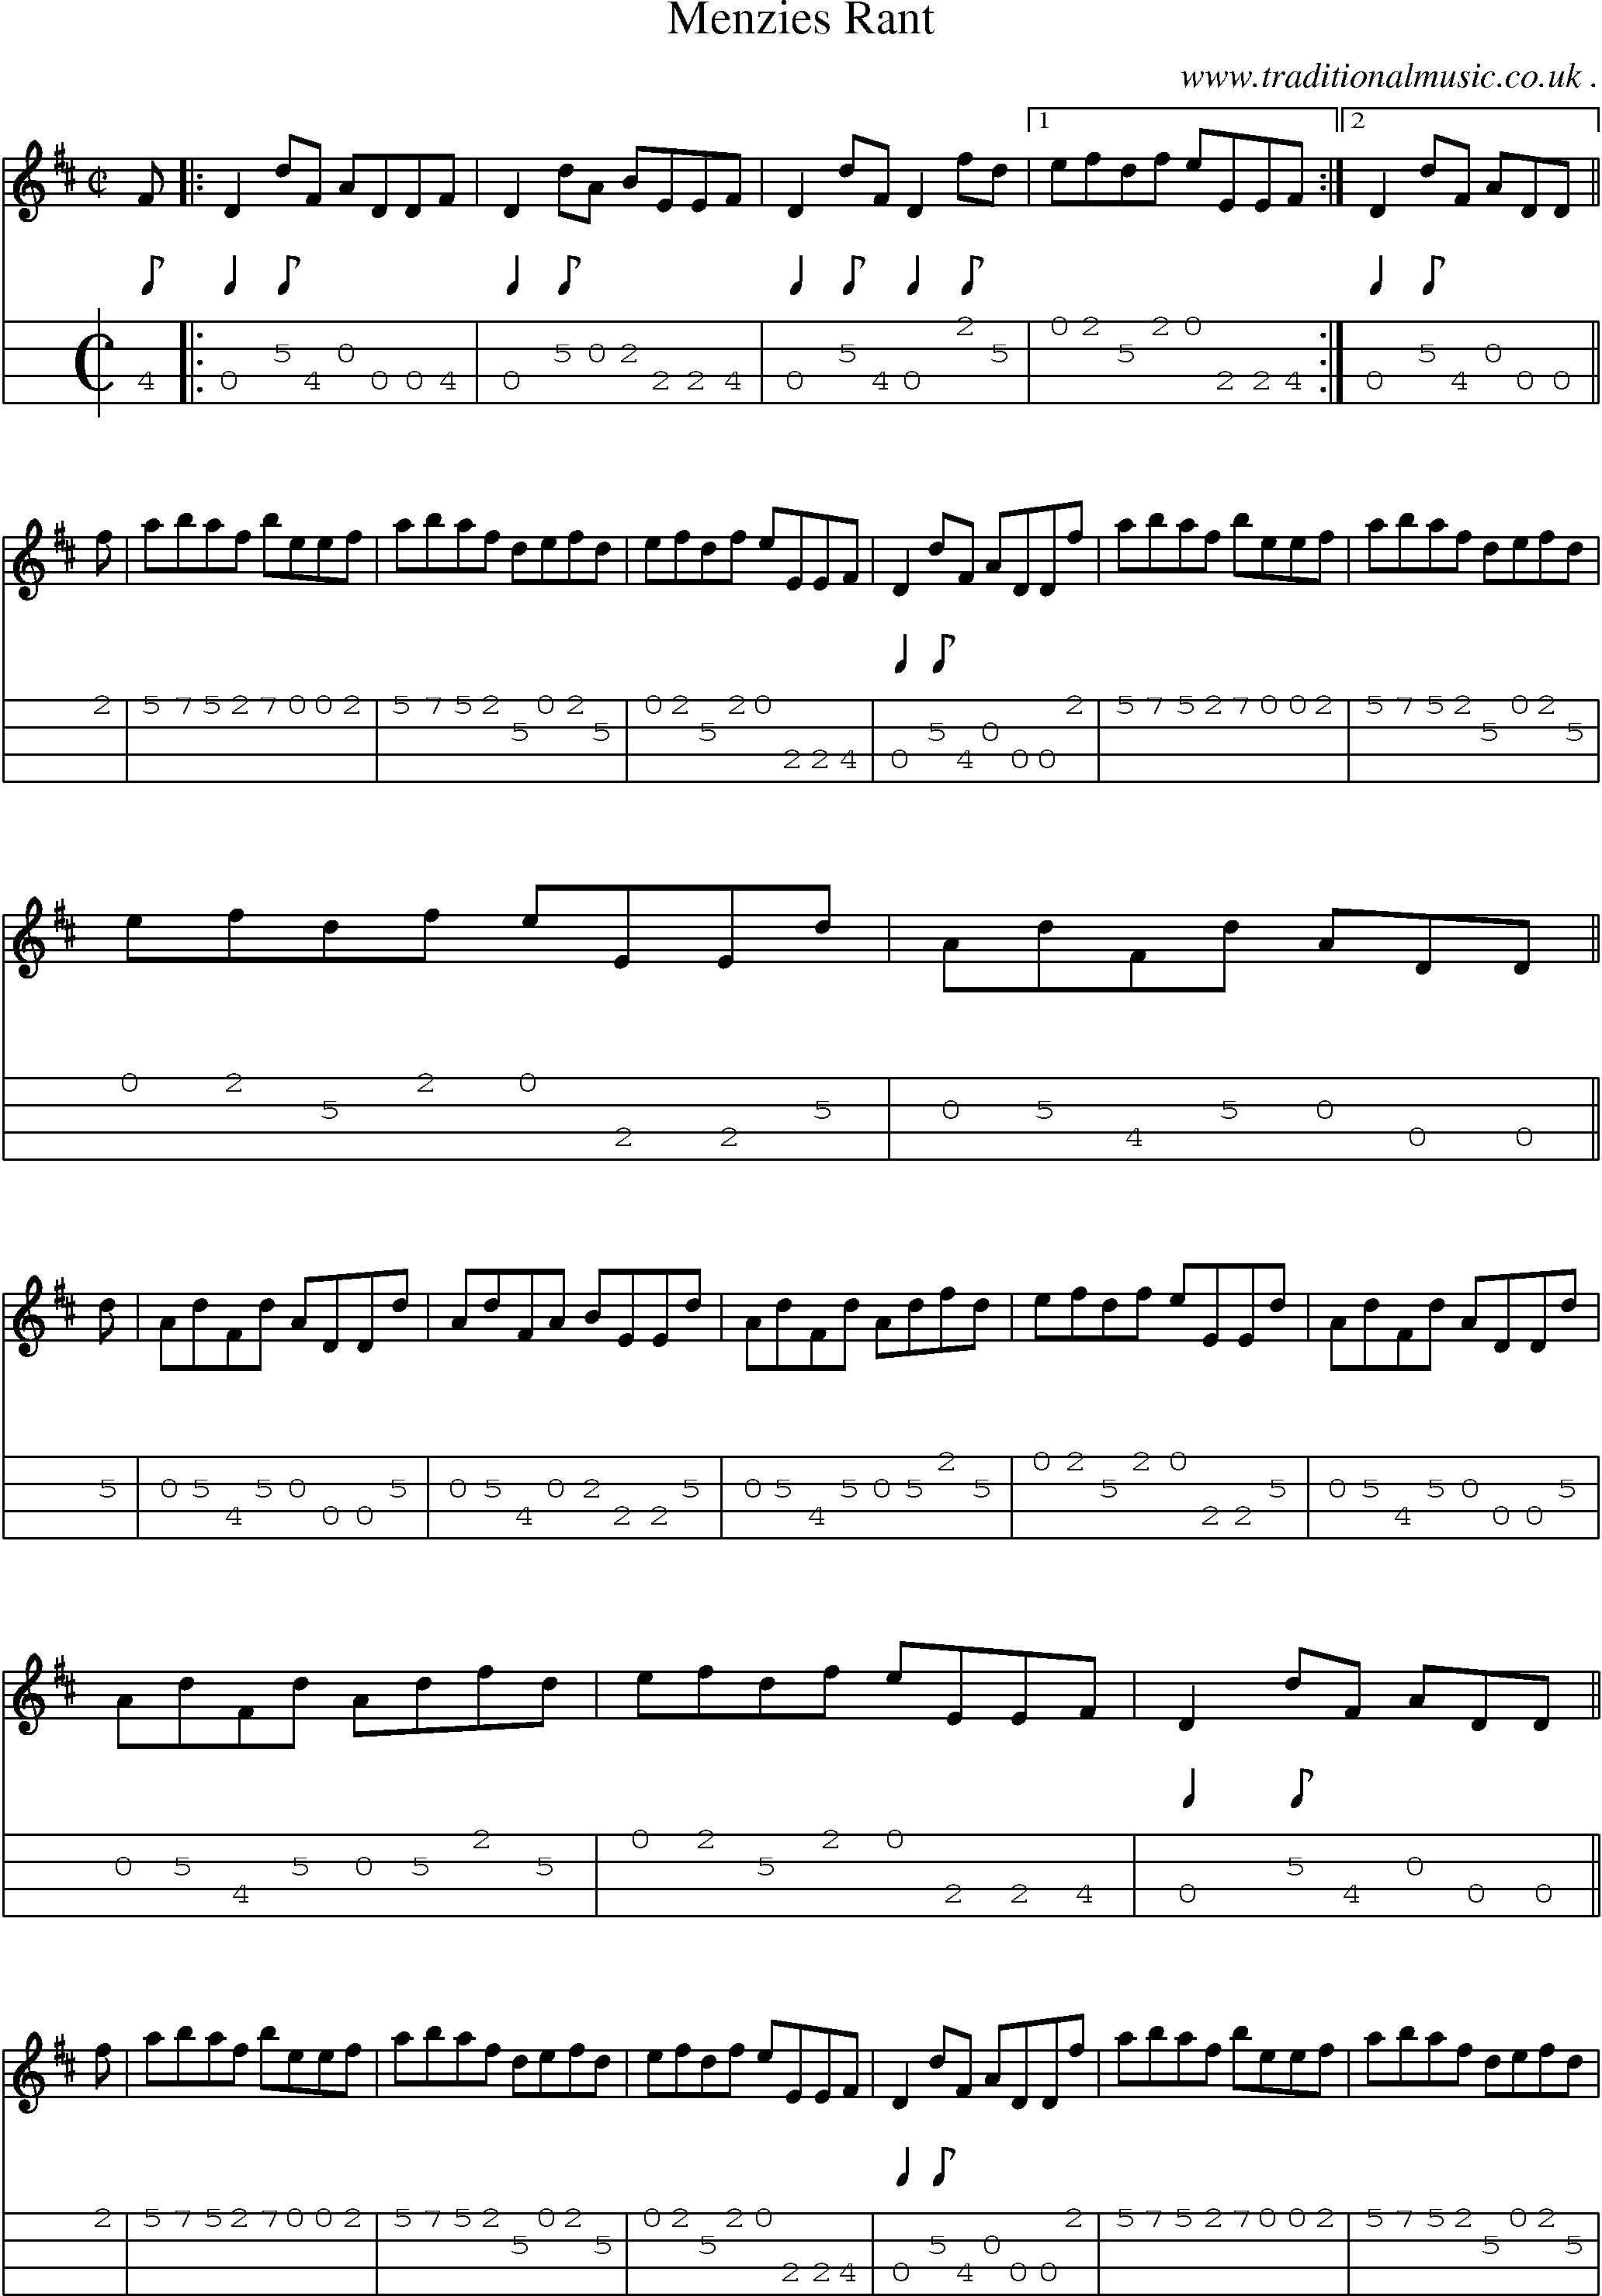 Sheet-music  score, Chords and Mandolin Tabs for Menzies Rant